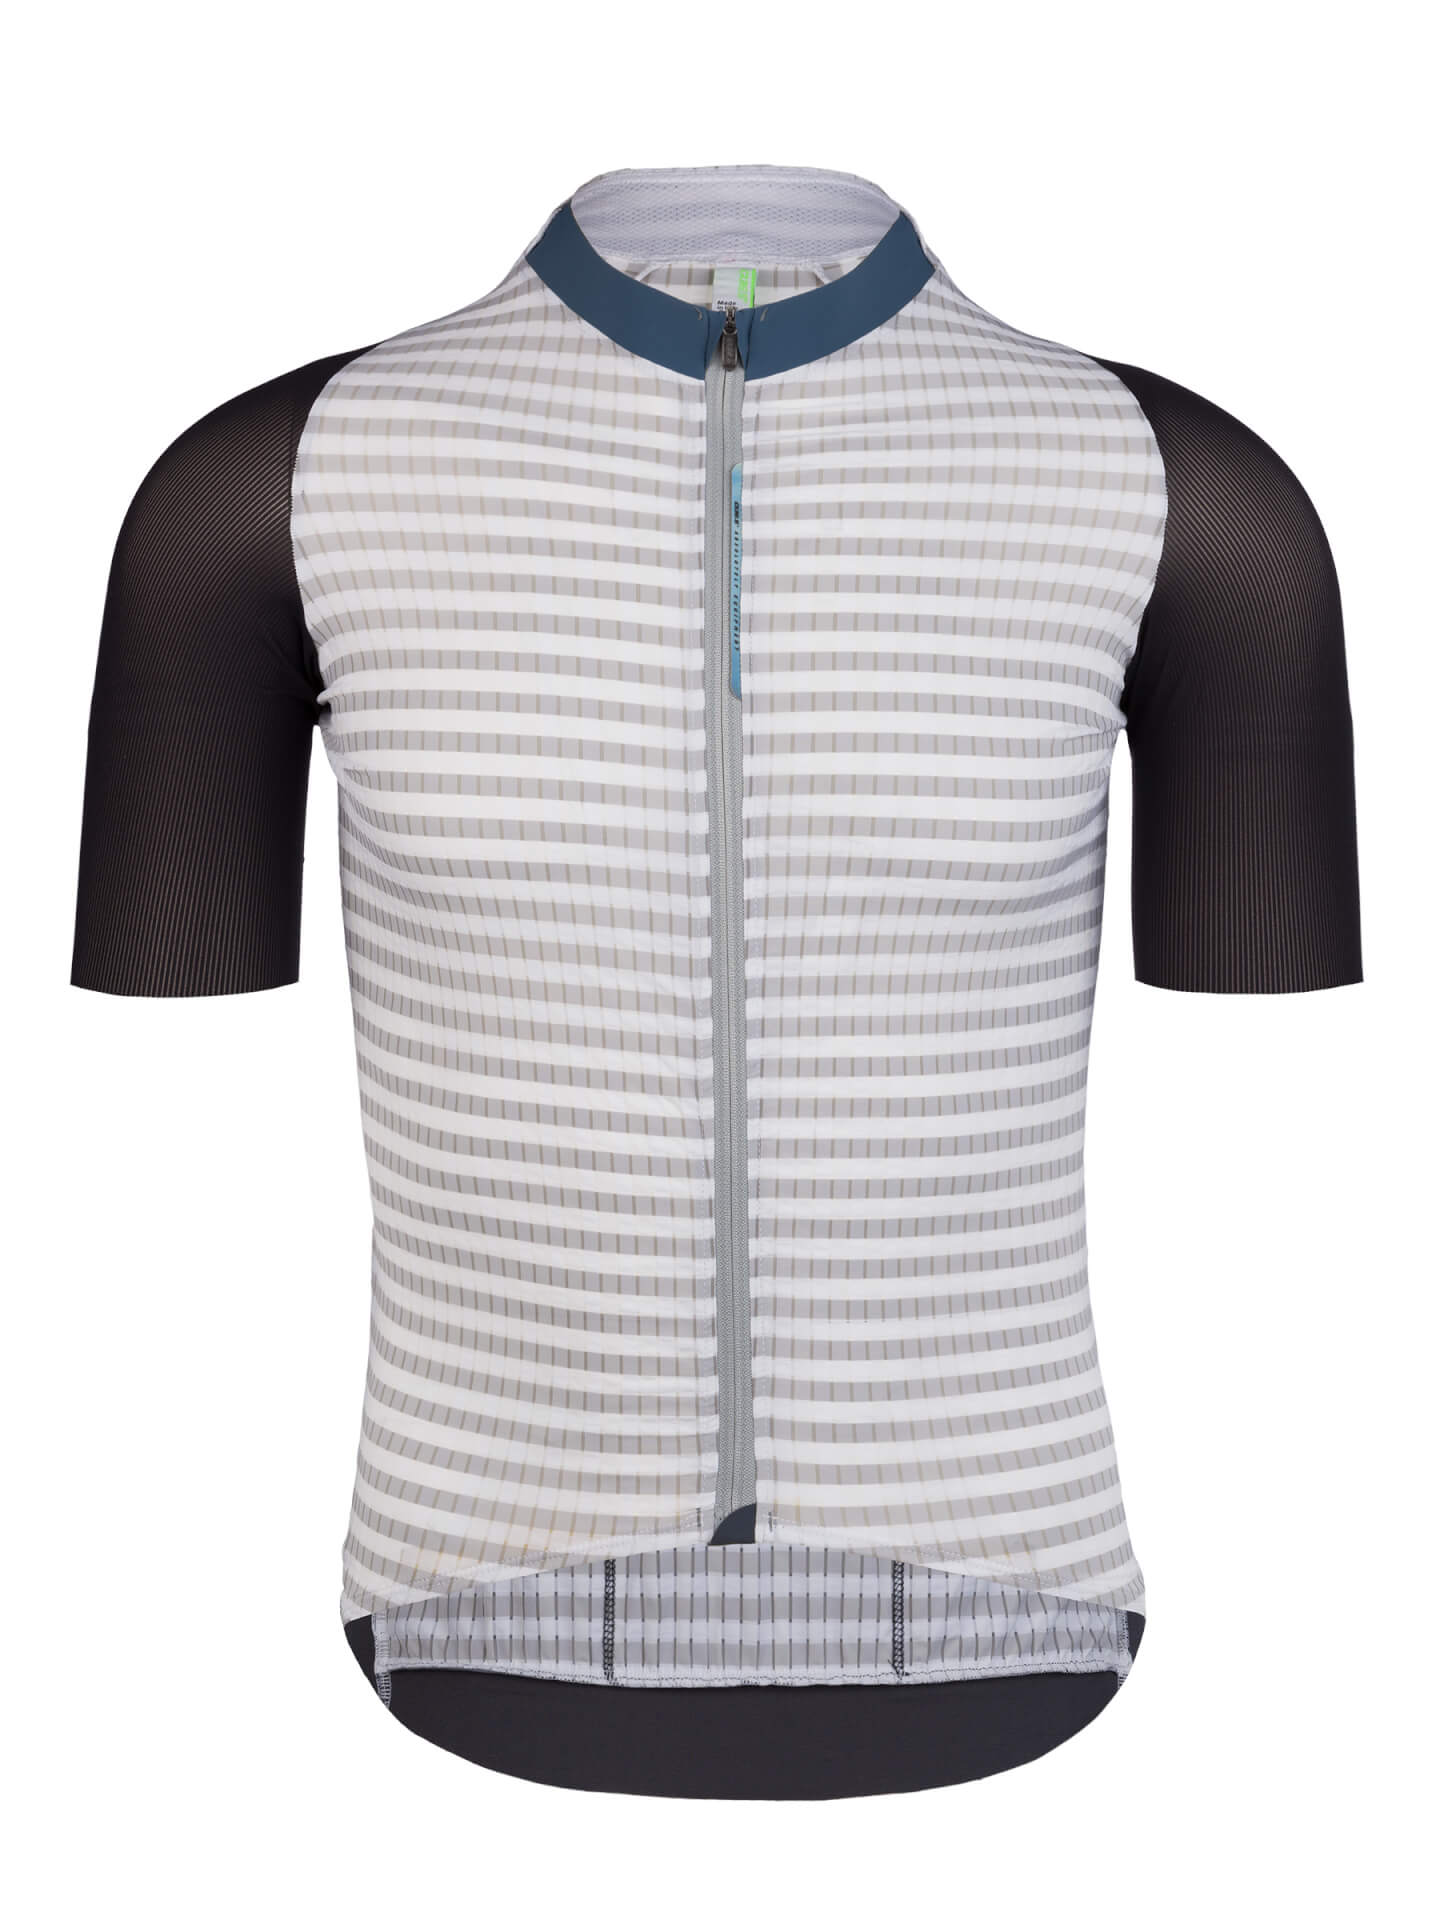 Q36.5 Jersey short sleeve Clima - Maillot vélo homme